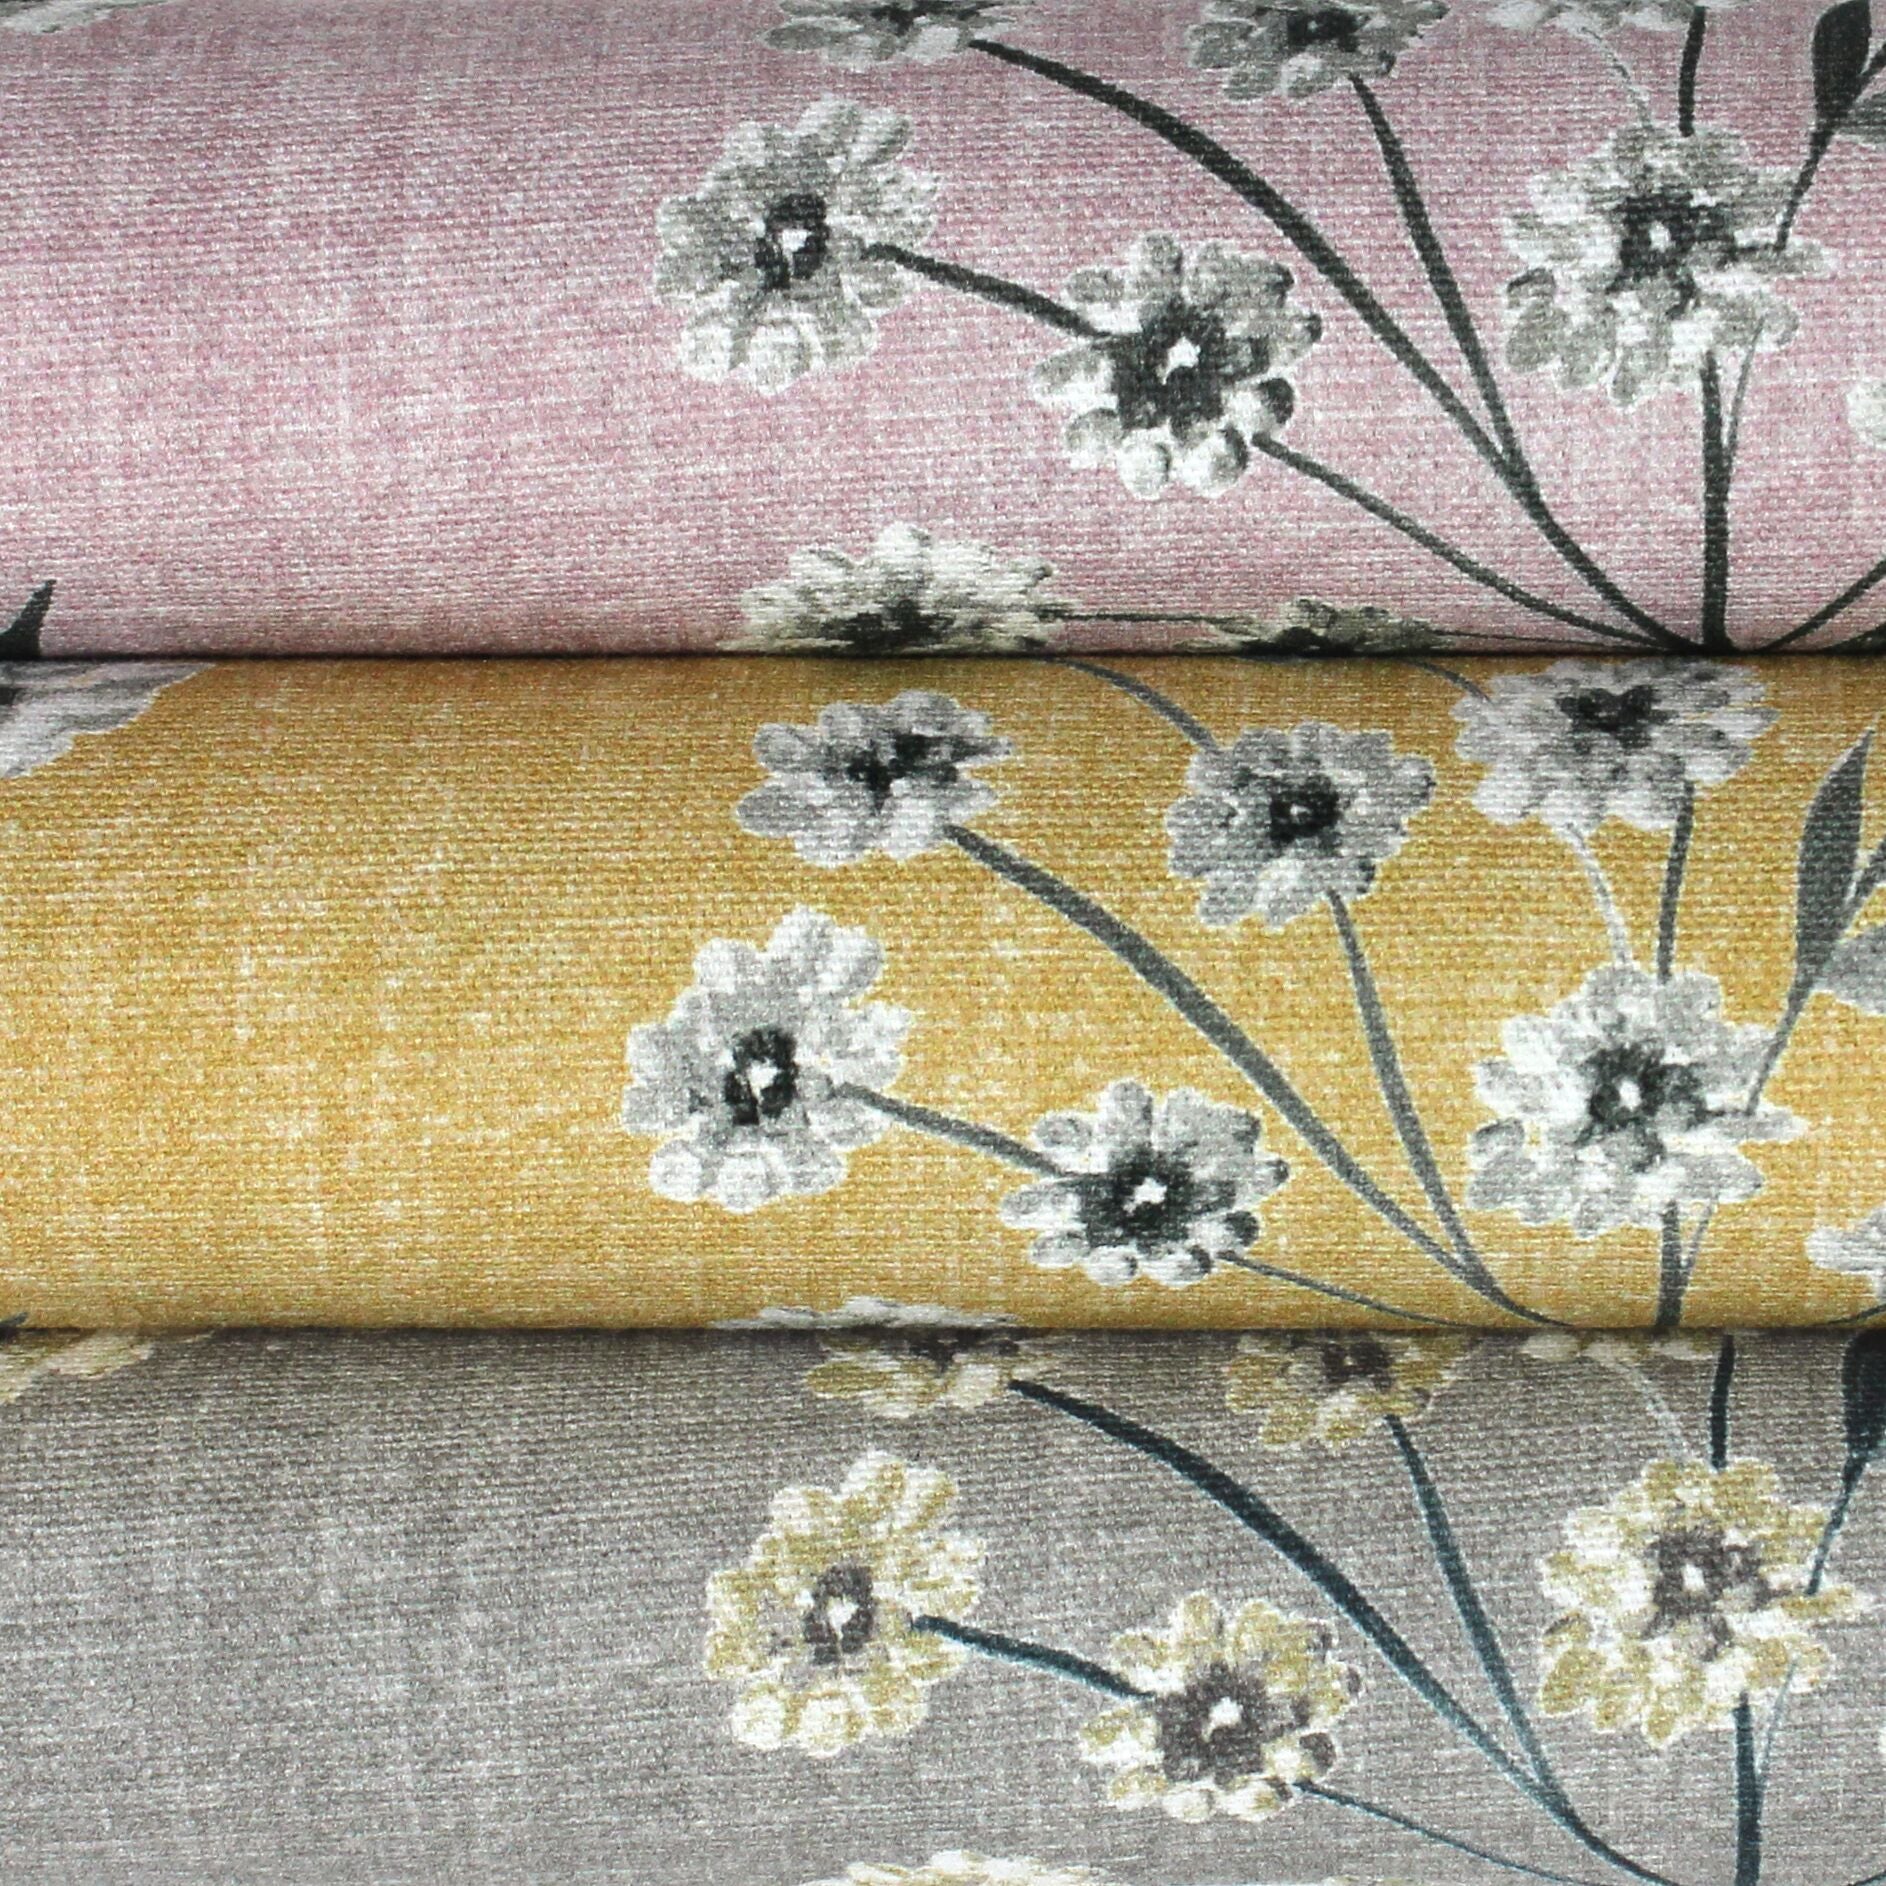 McAlister Textiles Meadow Soft Grey Floral Cotton Print Fabric Fabrics 